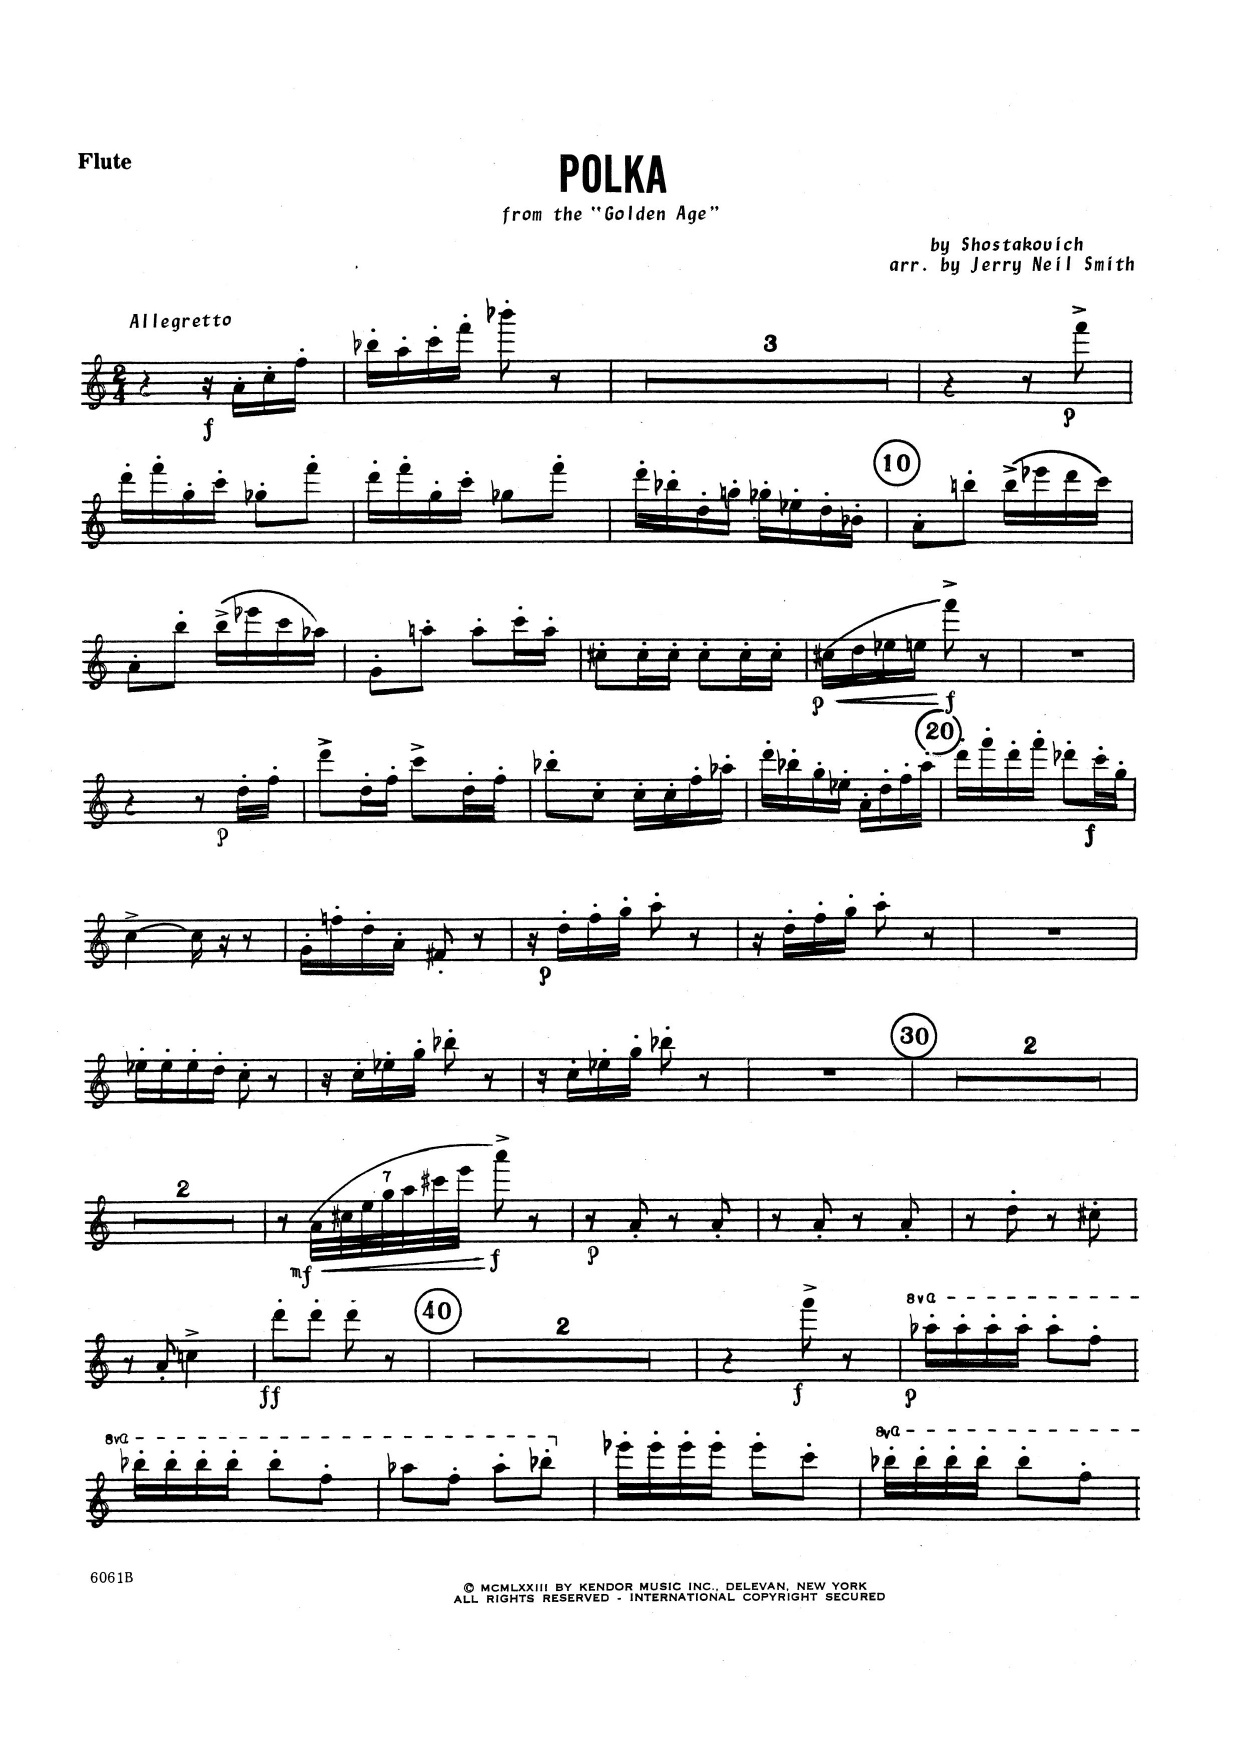 Download Jerry Smith Polka - Flute Sheet Music